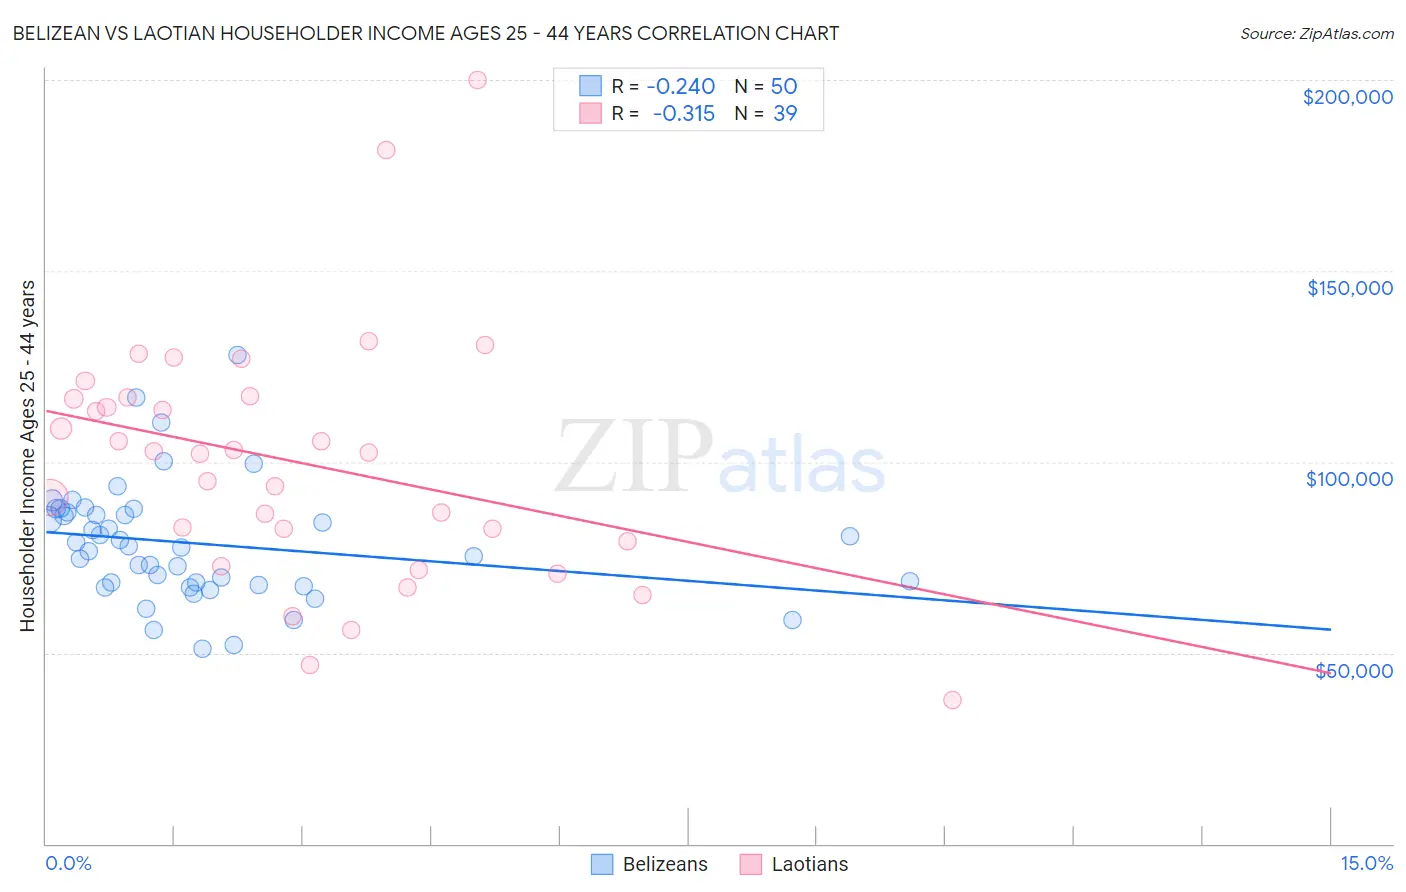 Belizean vs Laotian Householder Income Ages 25 - 44 years